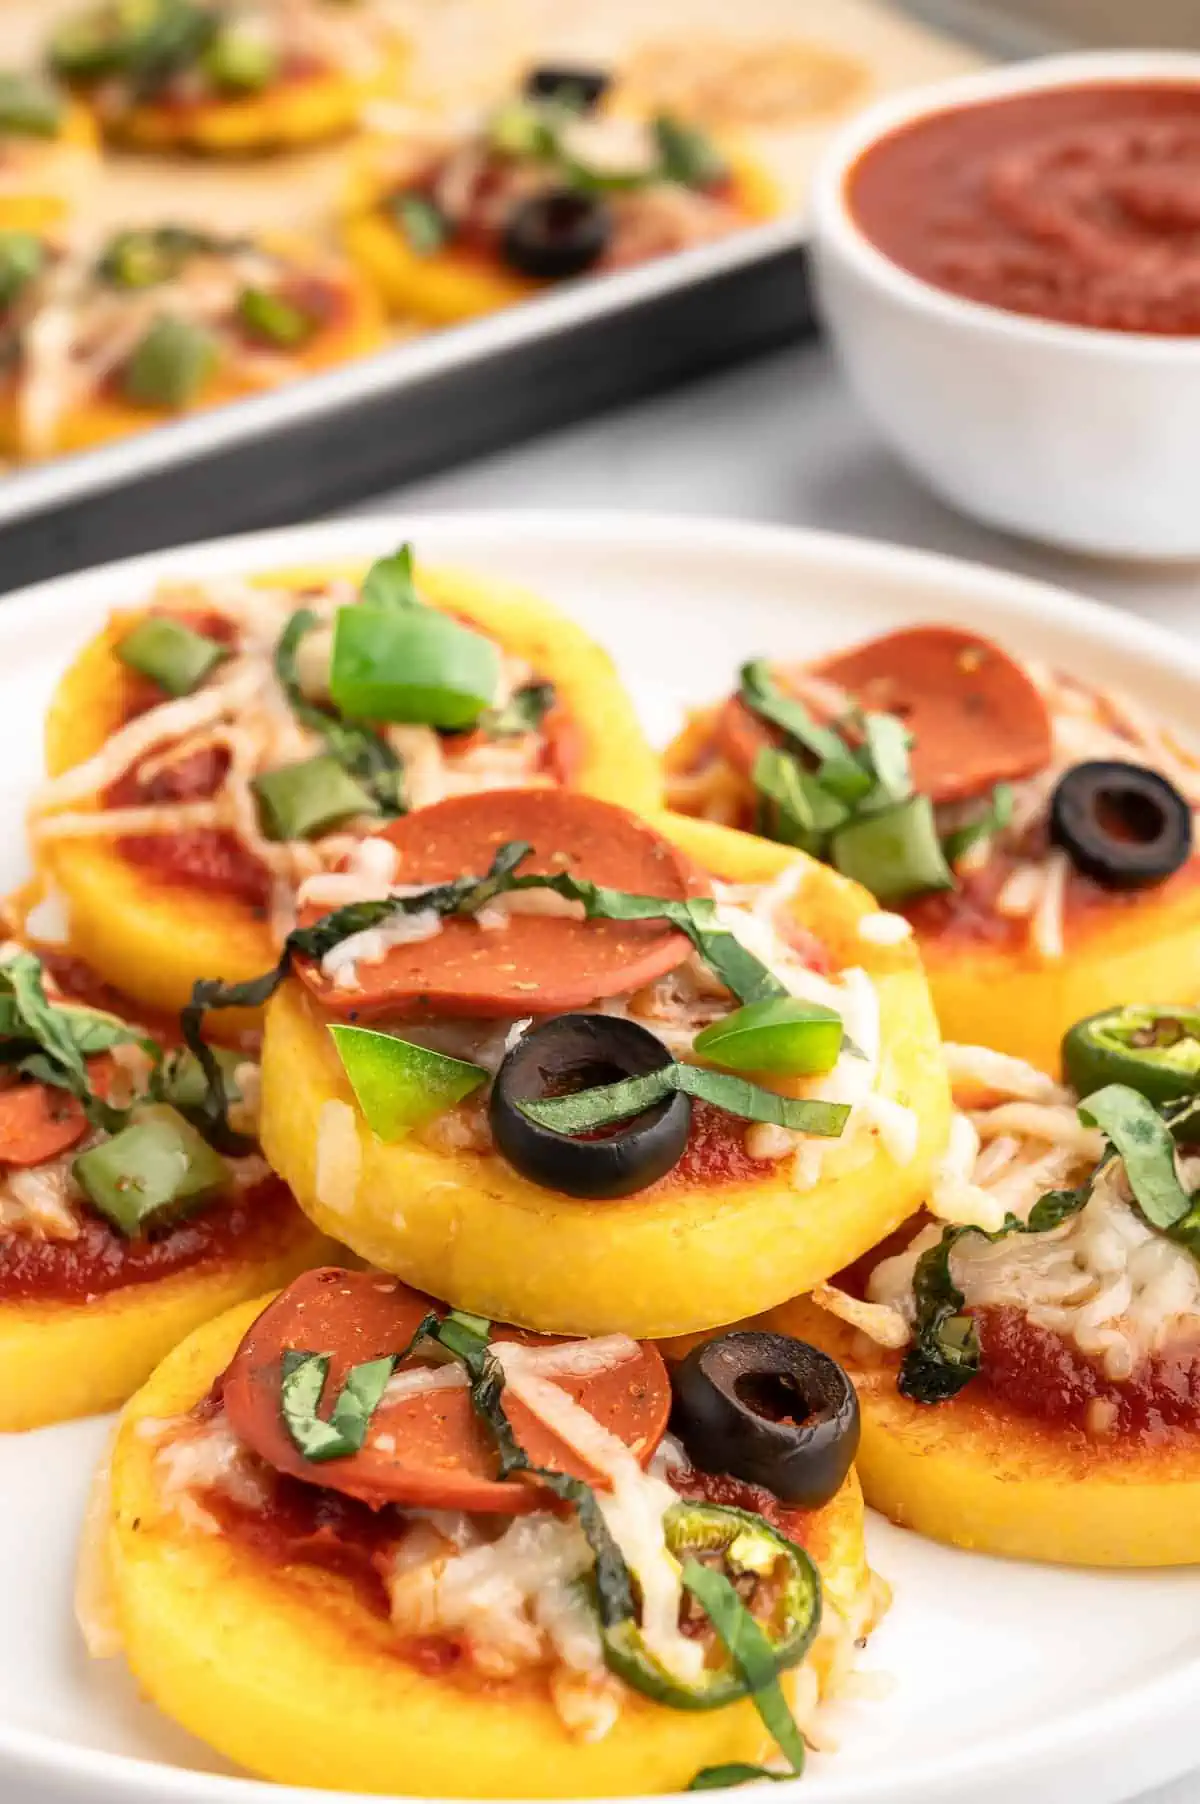 A stack of polenta pizza bites on a plate.